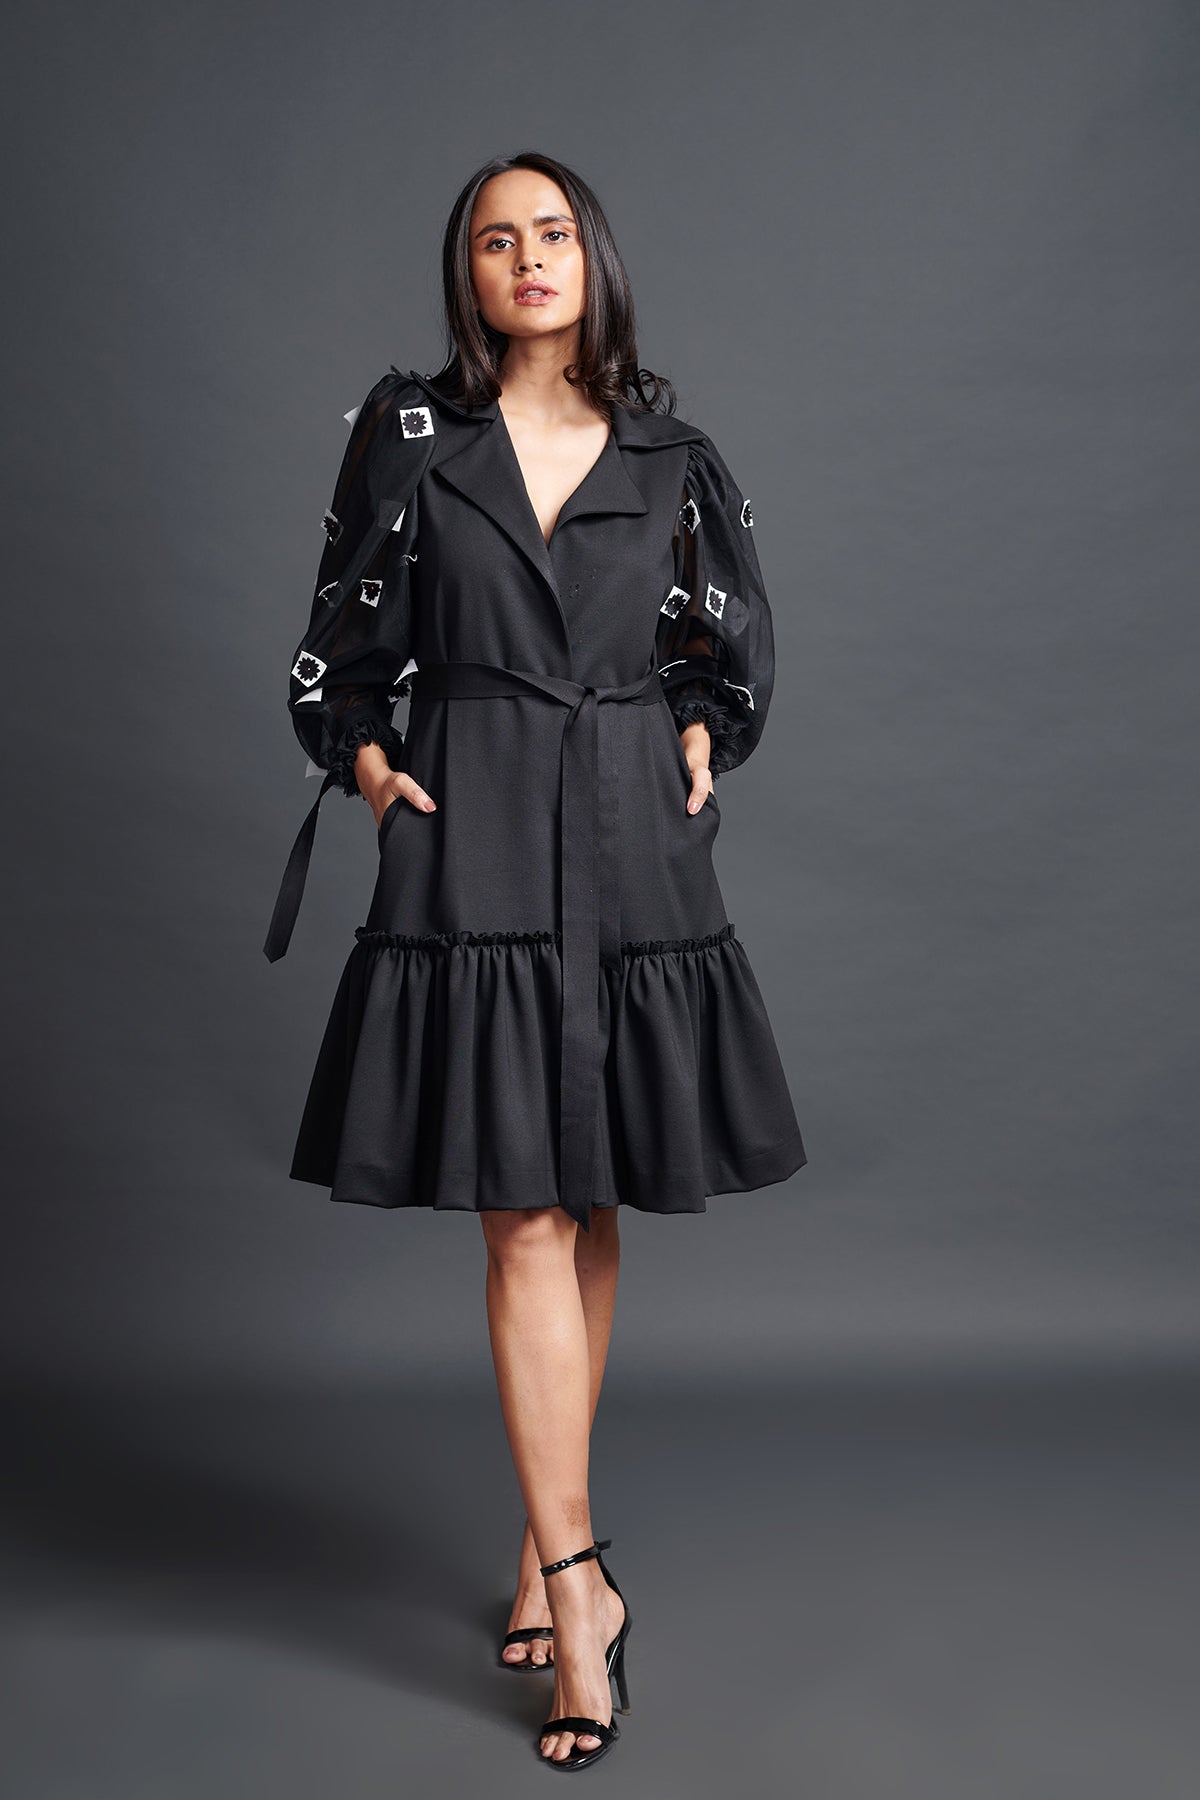 Image of BLACK JACKET DRESS WITH CUTWORK ON PUFFED SLEEVES. From savoirfashions.com